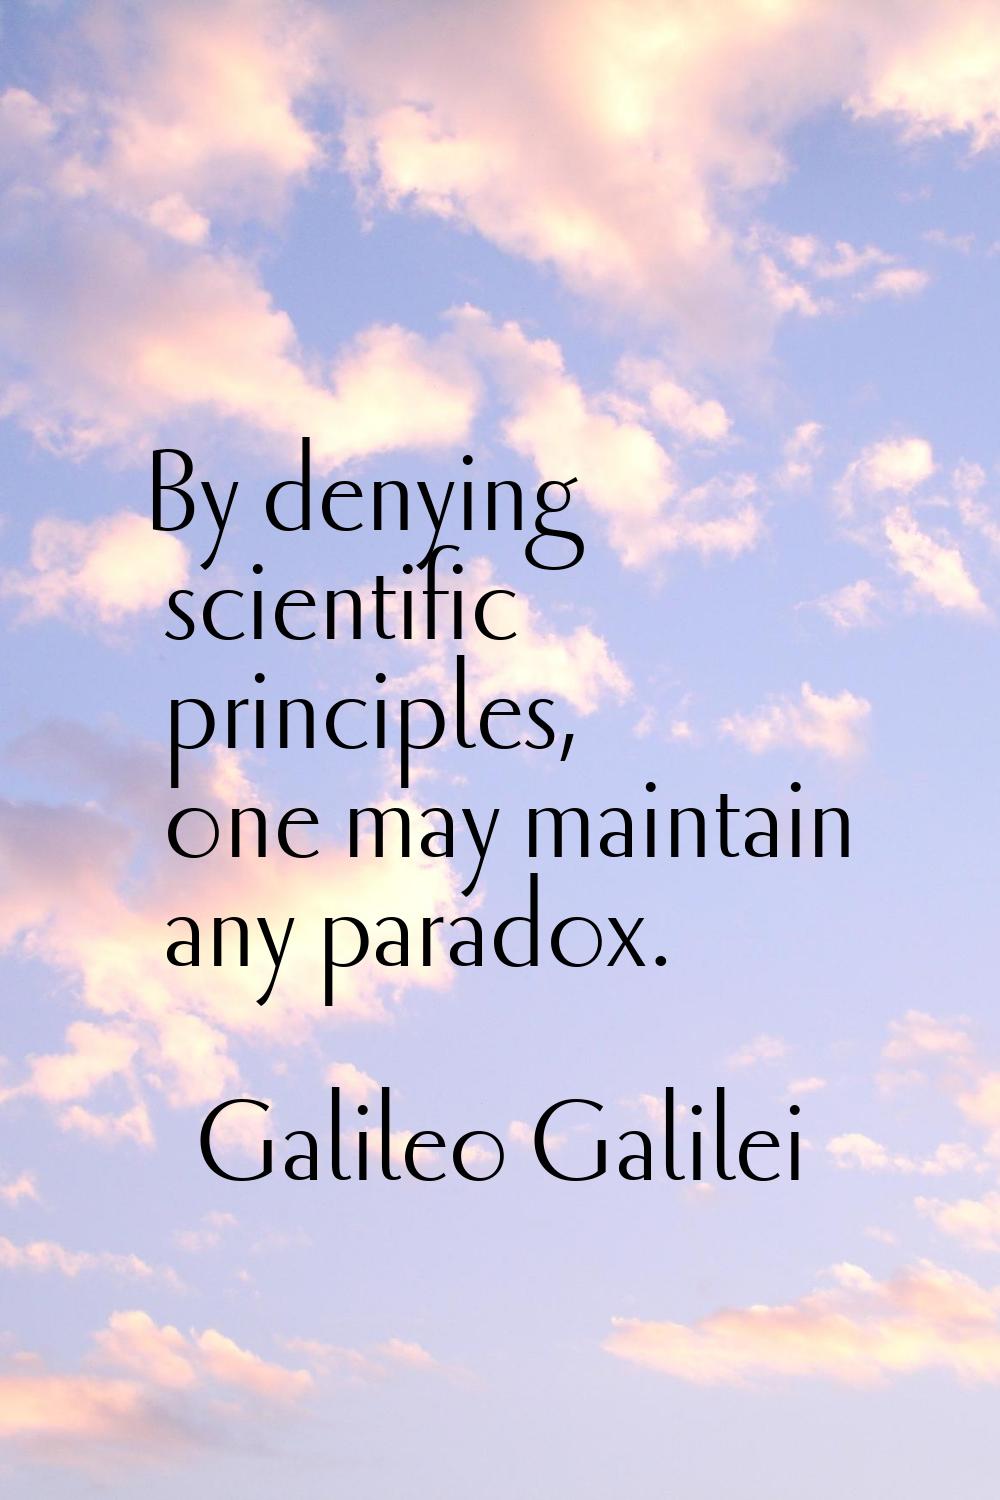 By denying scientific principles, one may maintain any paradox.